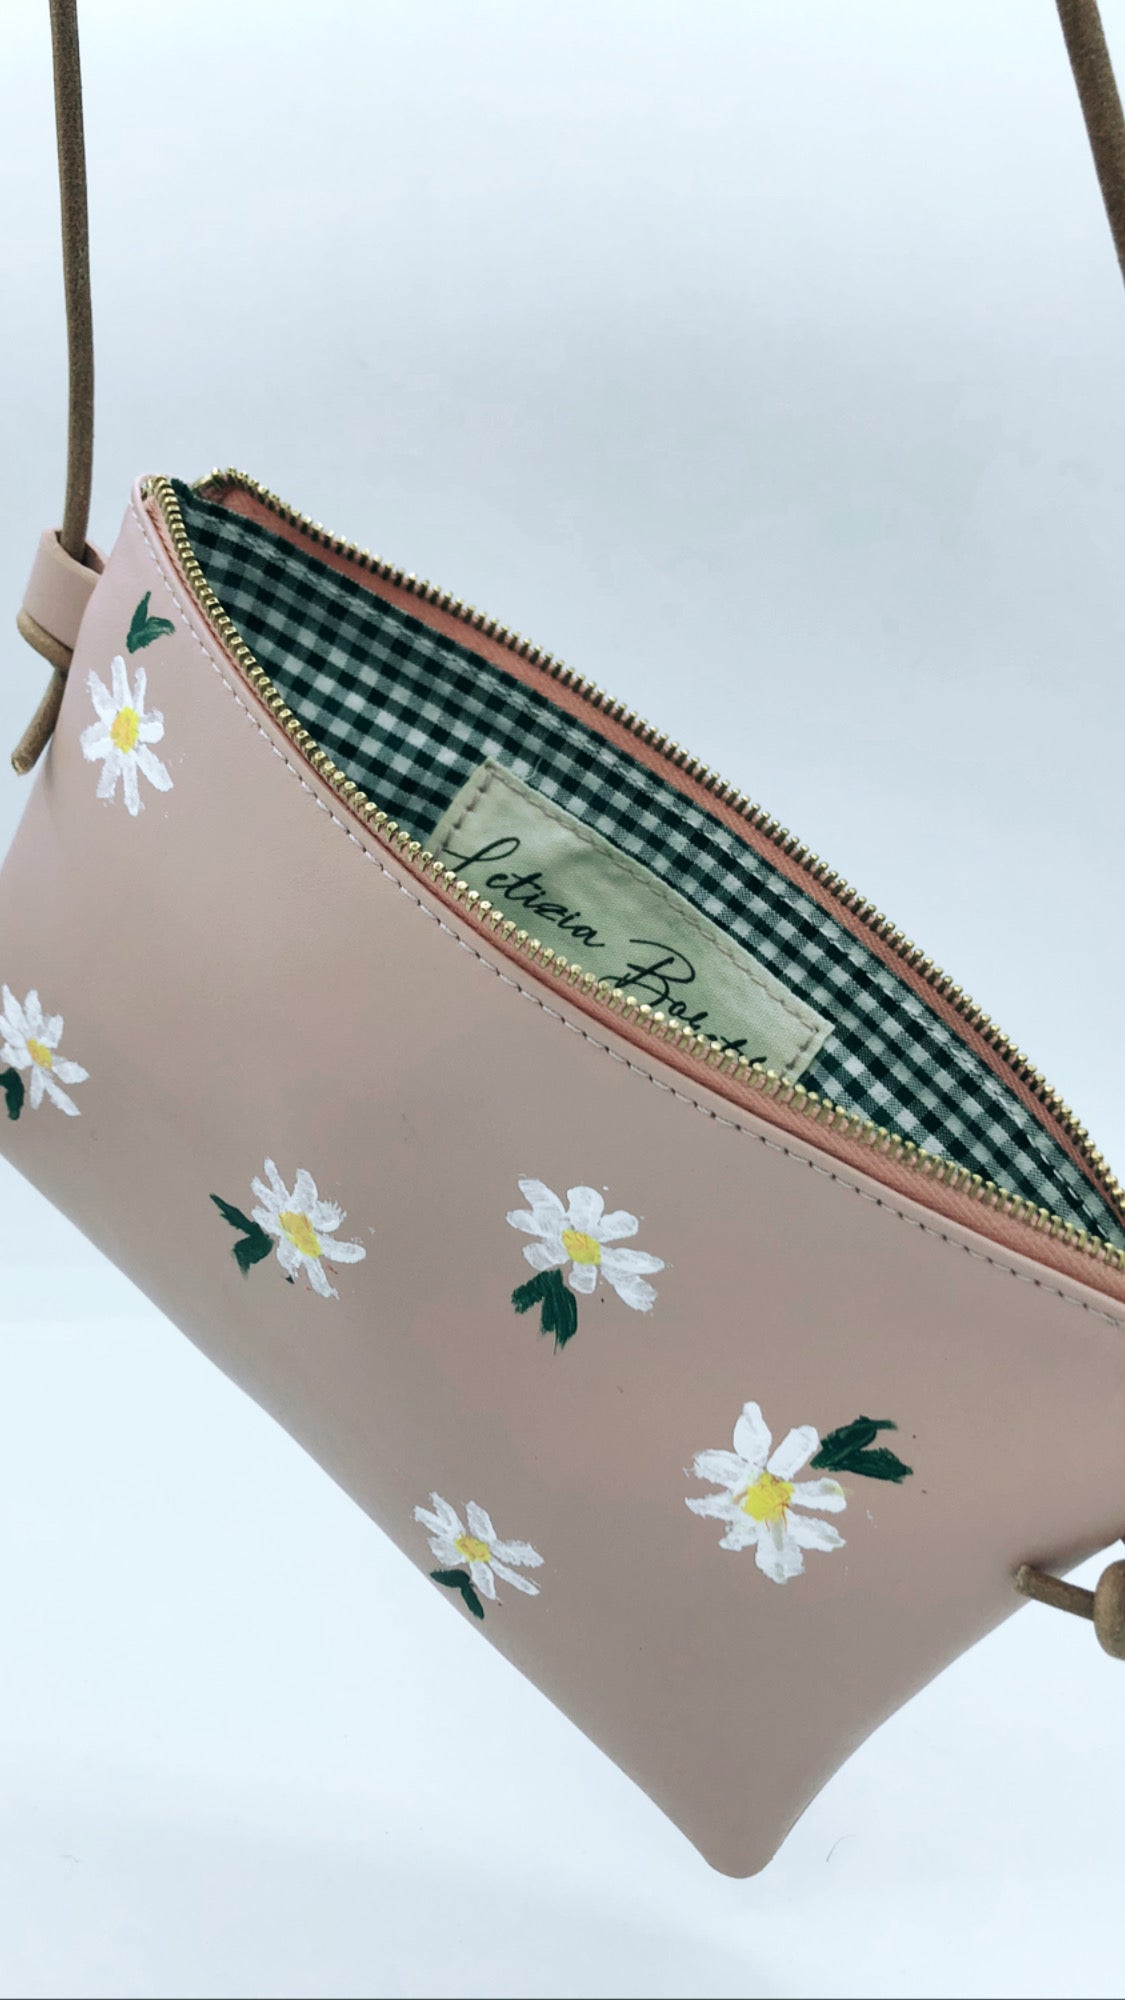 Little hand painted leather crossbody bag